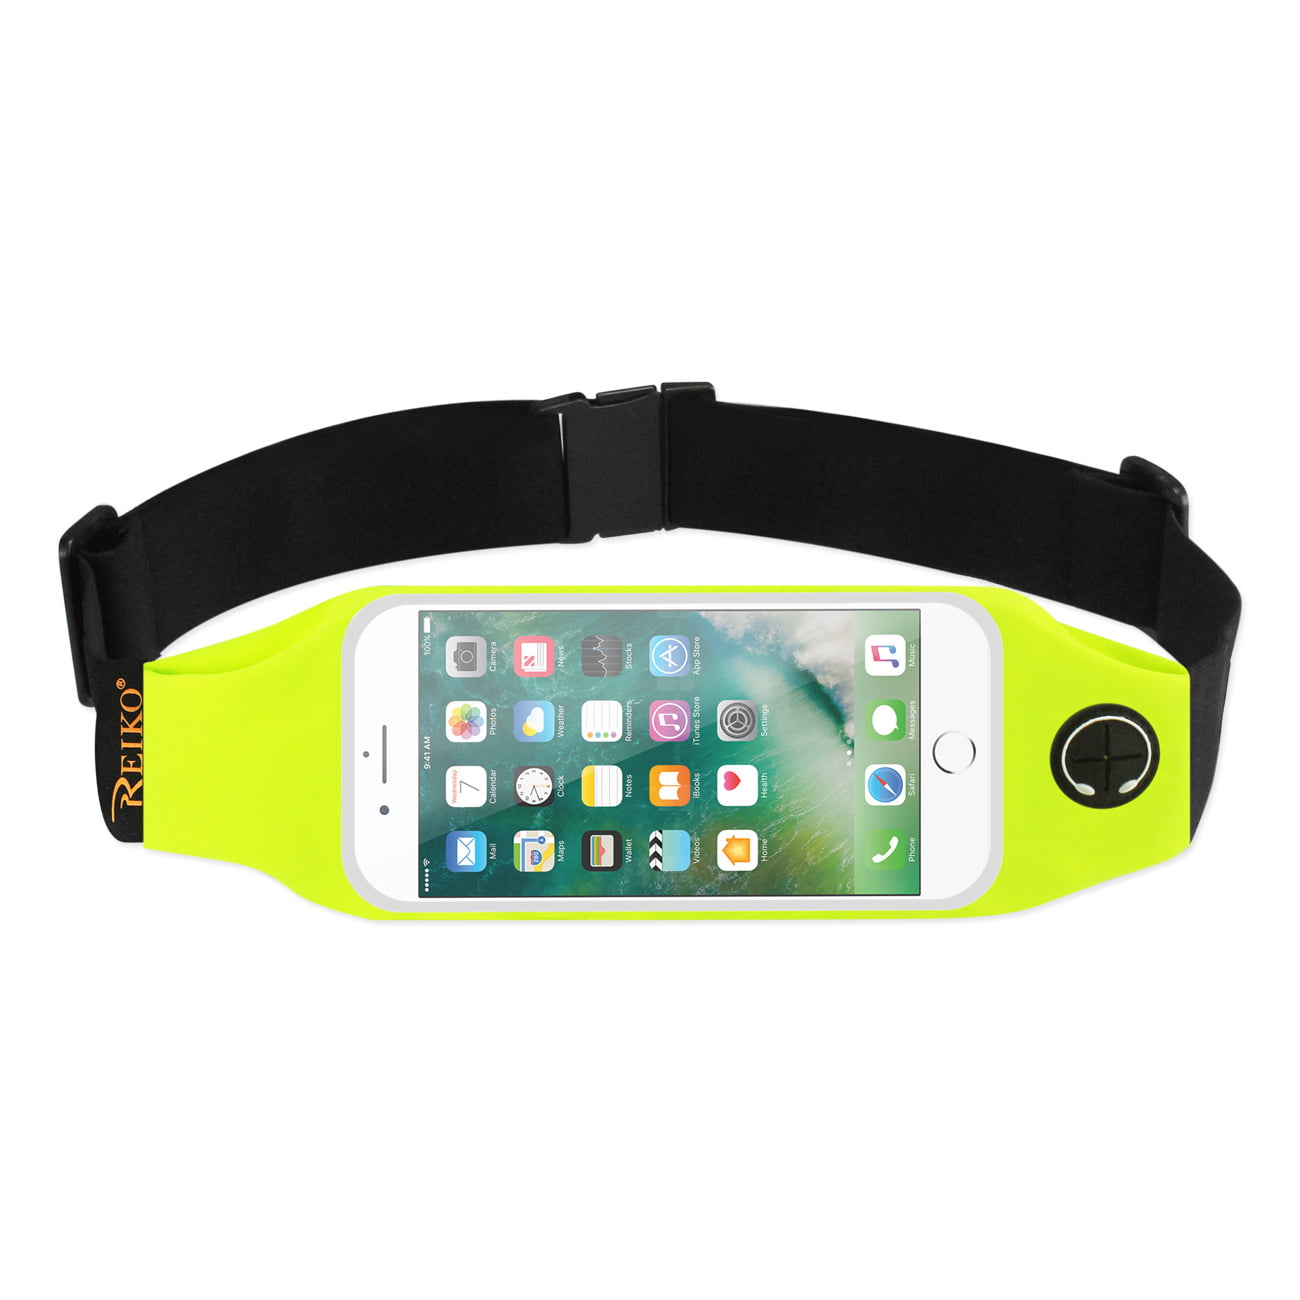 Running Sport Belt For Iphone 7 Plus/ 6s Plus Or 5.5 Inches Device With Two Pockets And Led In Green (5.5x5.5 Inches) Walmart.com